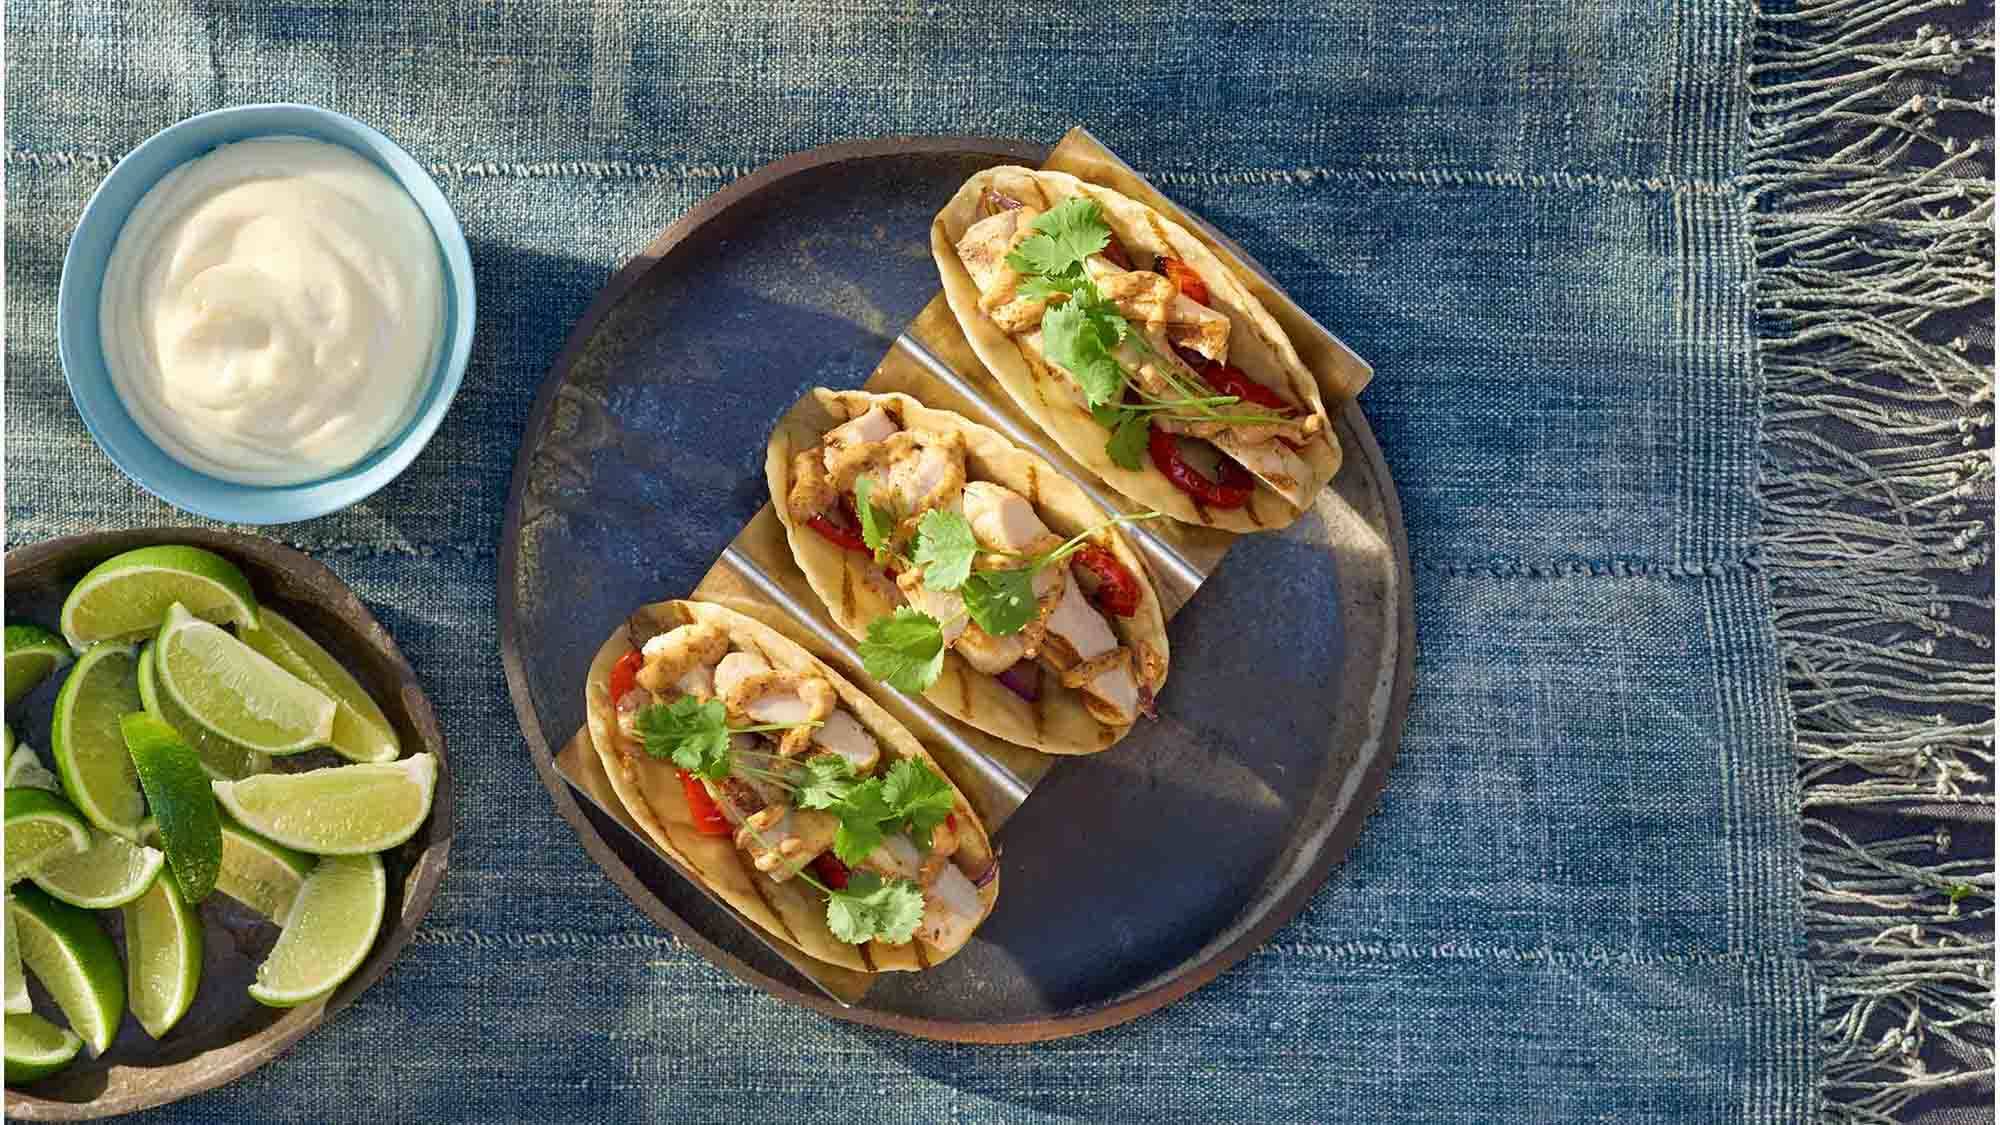 Grilled Chicken Tacos with Chipotle Mayo